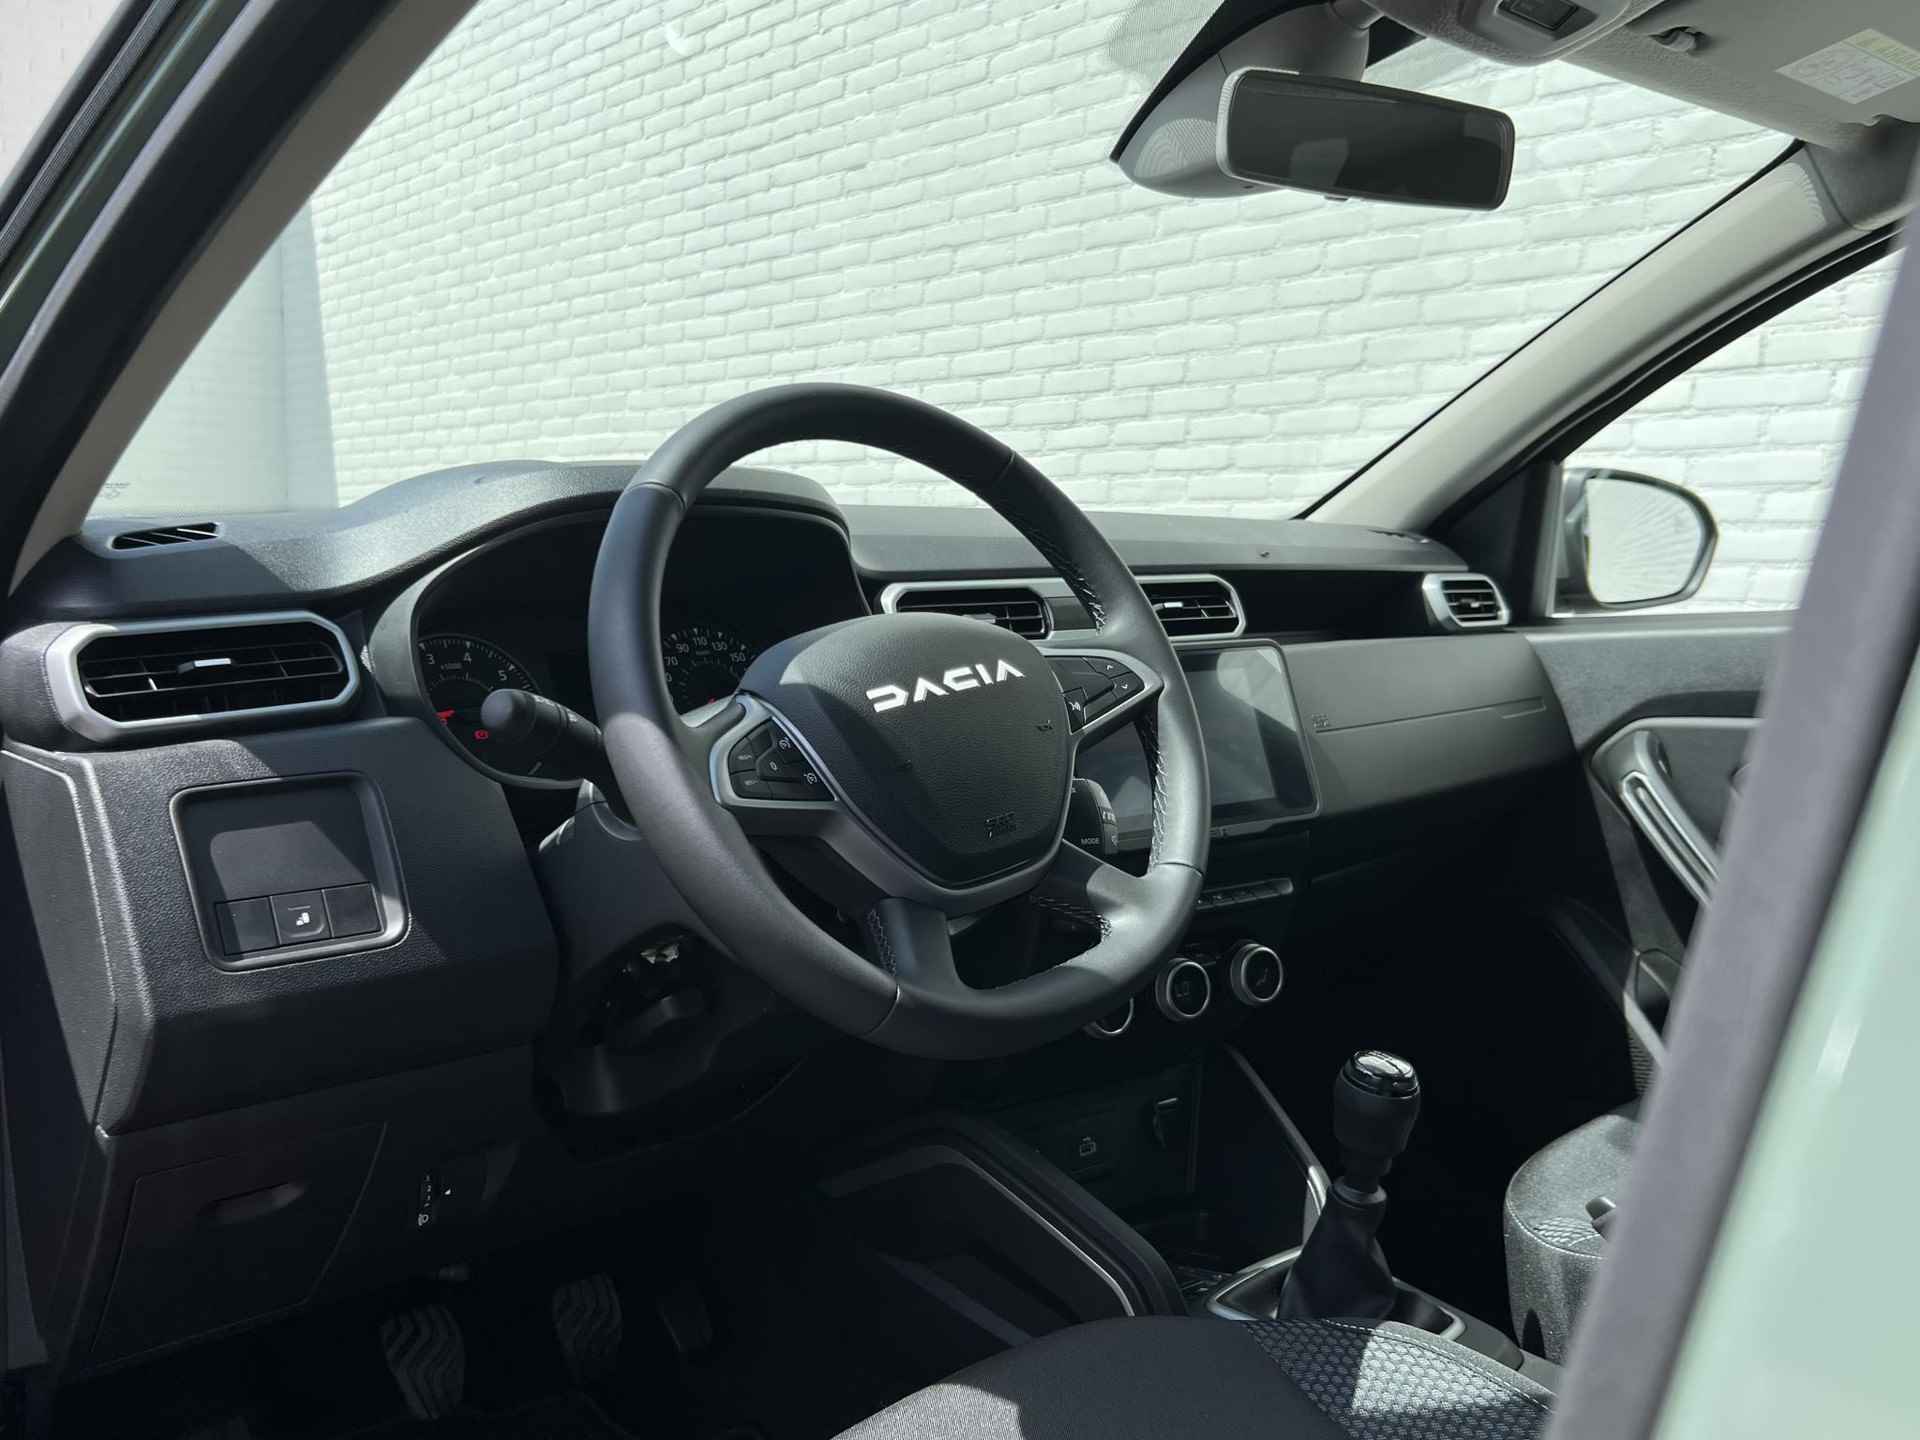 Dacia Duster 1.3 TCe 130 Journey / 360 Camera / Parkeersensoren voor + Achter / Apple Carplay & Android Auto / Navi / Cruise / Clima / DAB / LED / Keyless / - 8/38